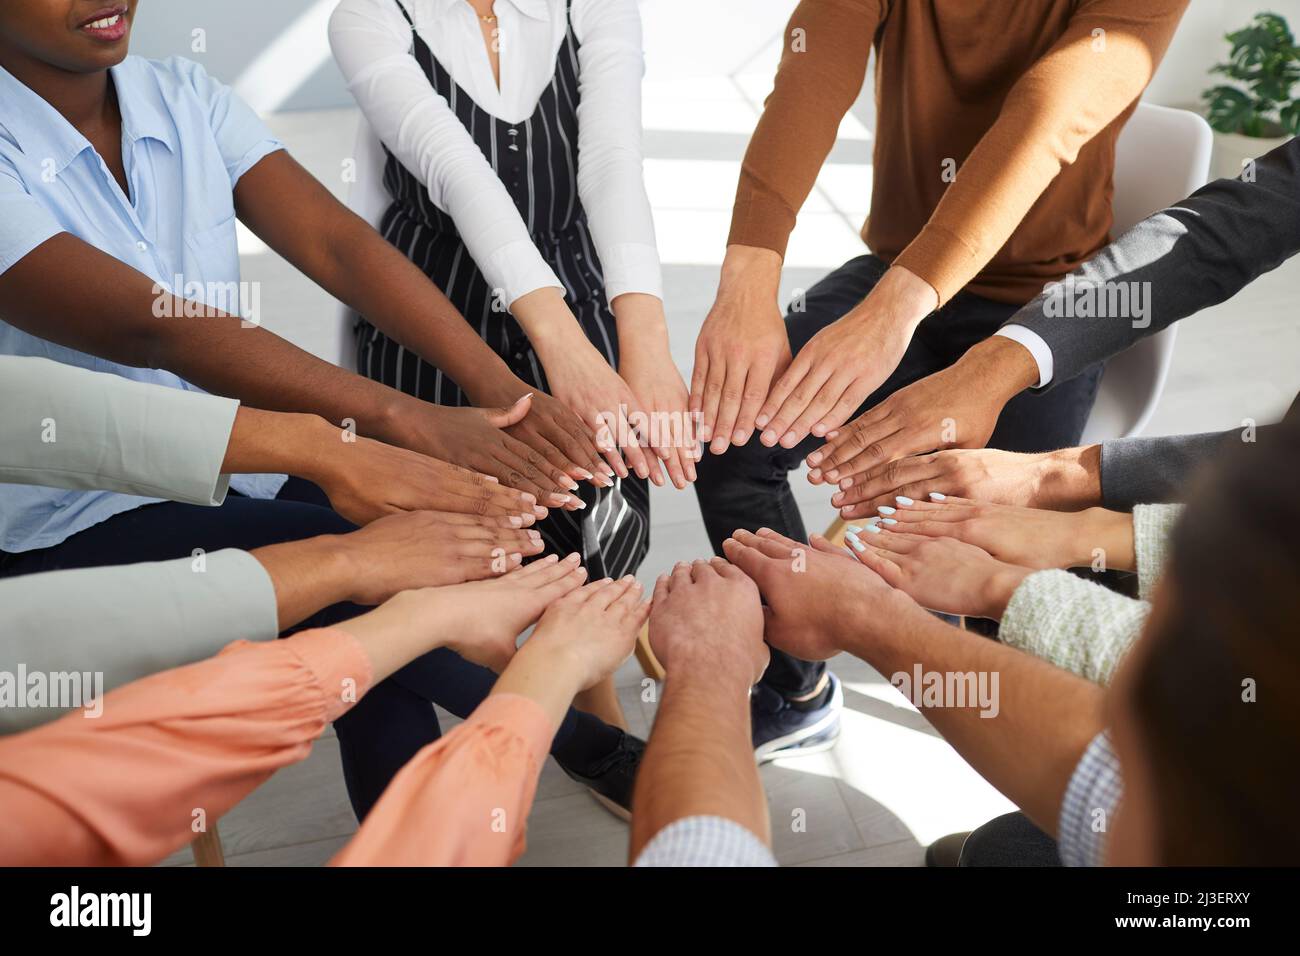 Team of happy multiethnic men and women together putting their hands in a circle Stock Photo